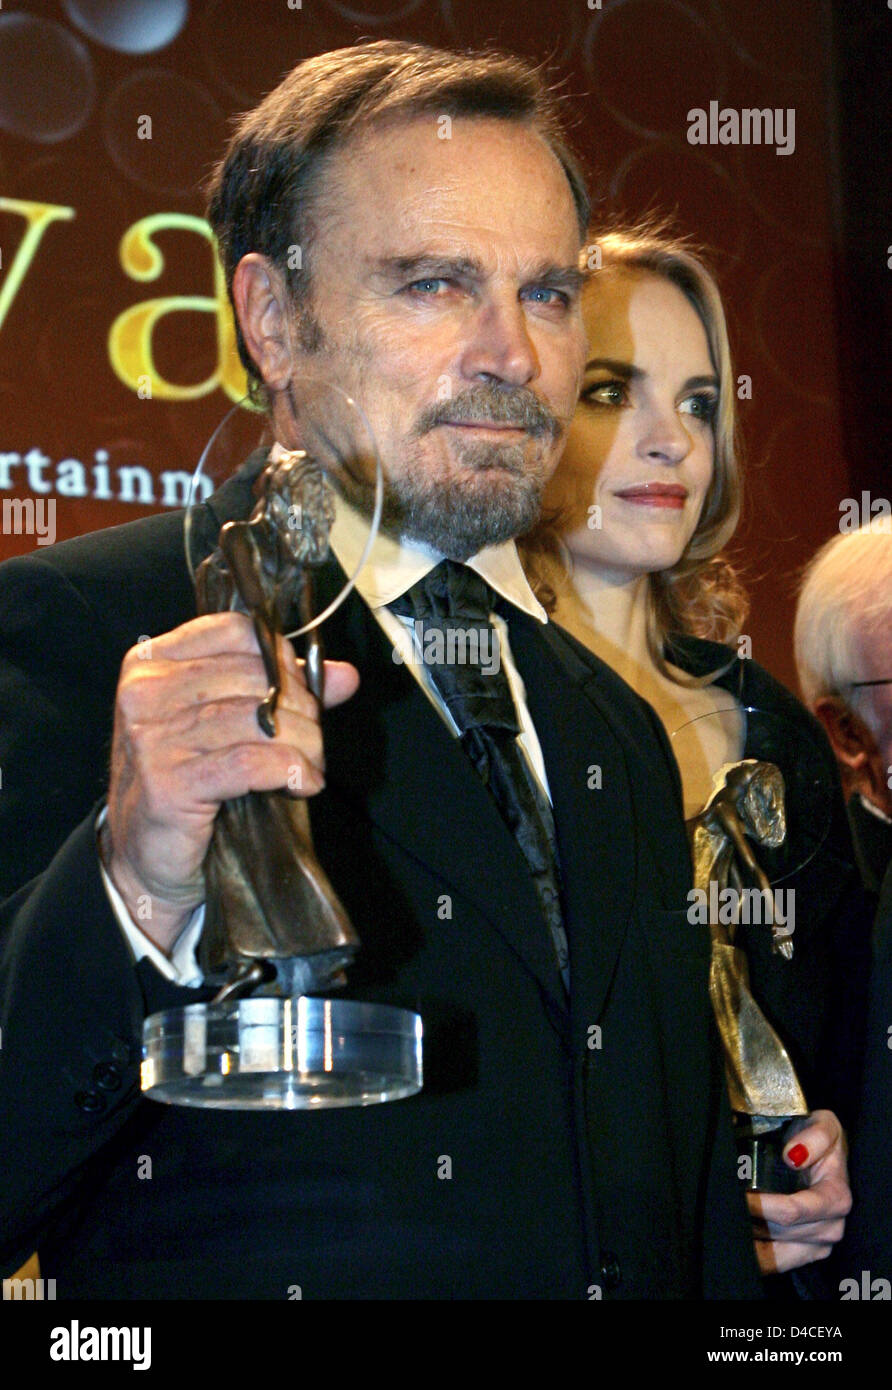 Italian actor Franco Nero shows his Diva award at the Diva entertainment  award gala in Munich, 24 January 2008. Nero was admitted to the Diva 'Hall  of Fame'. Nina Hoss is pictured